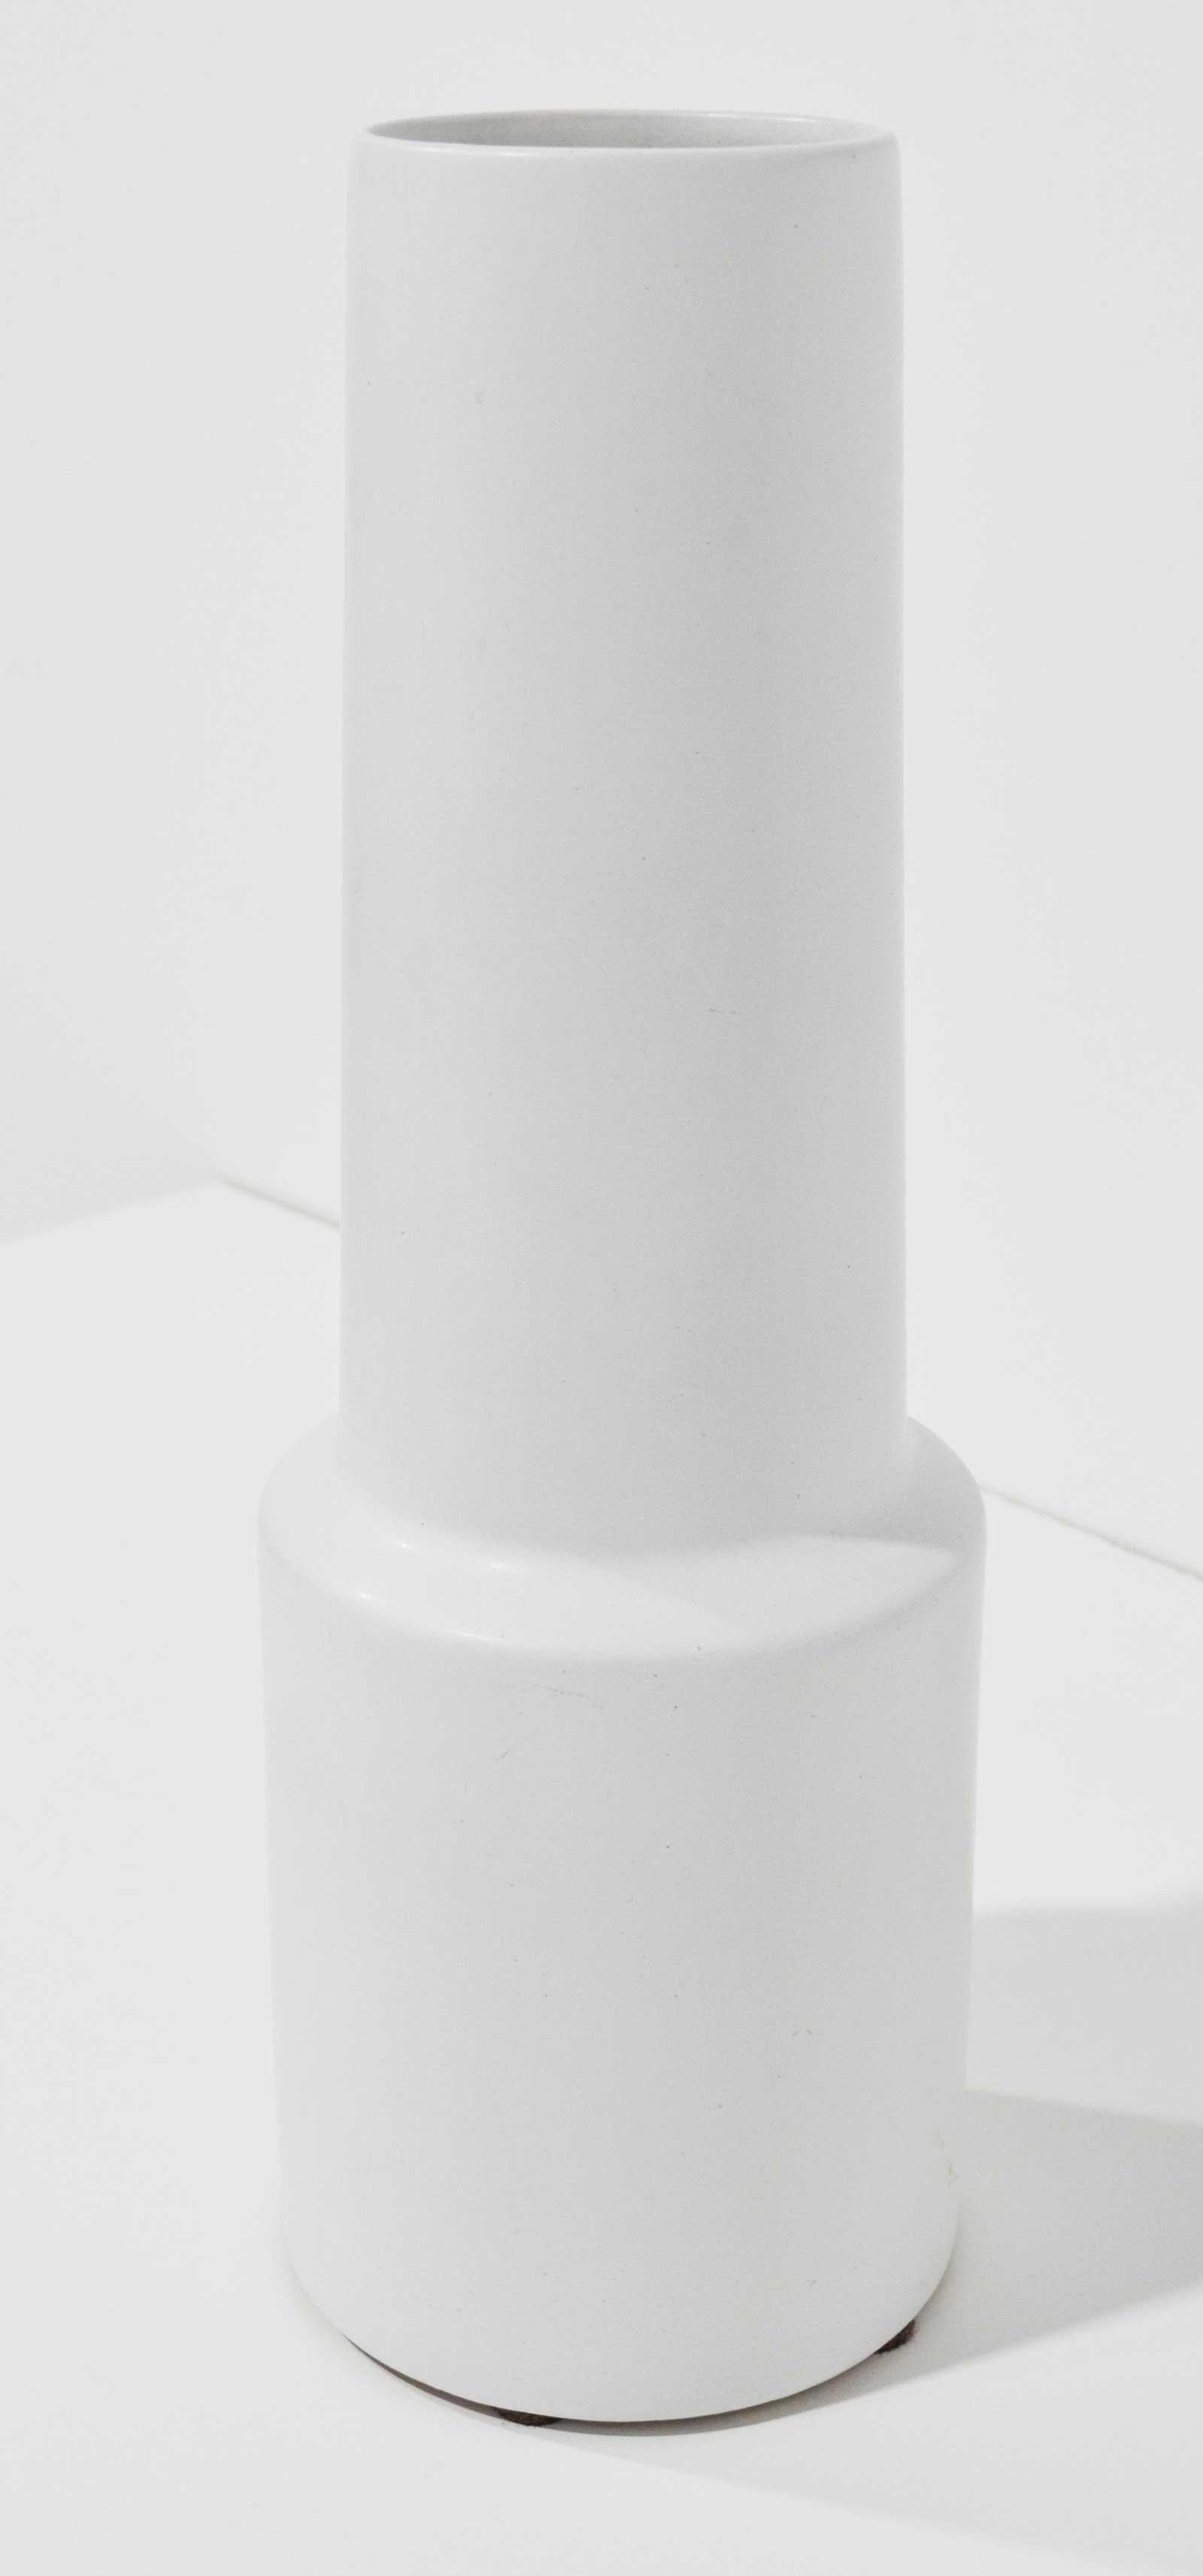 Tall West German Ceramic Vase in White In Good Condition For Sale In Dallas, TX